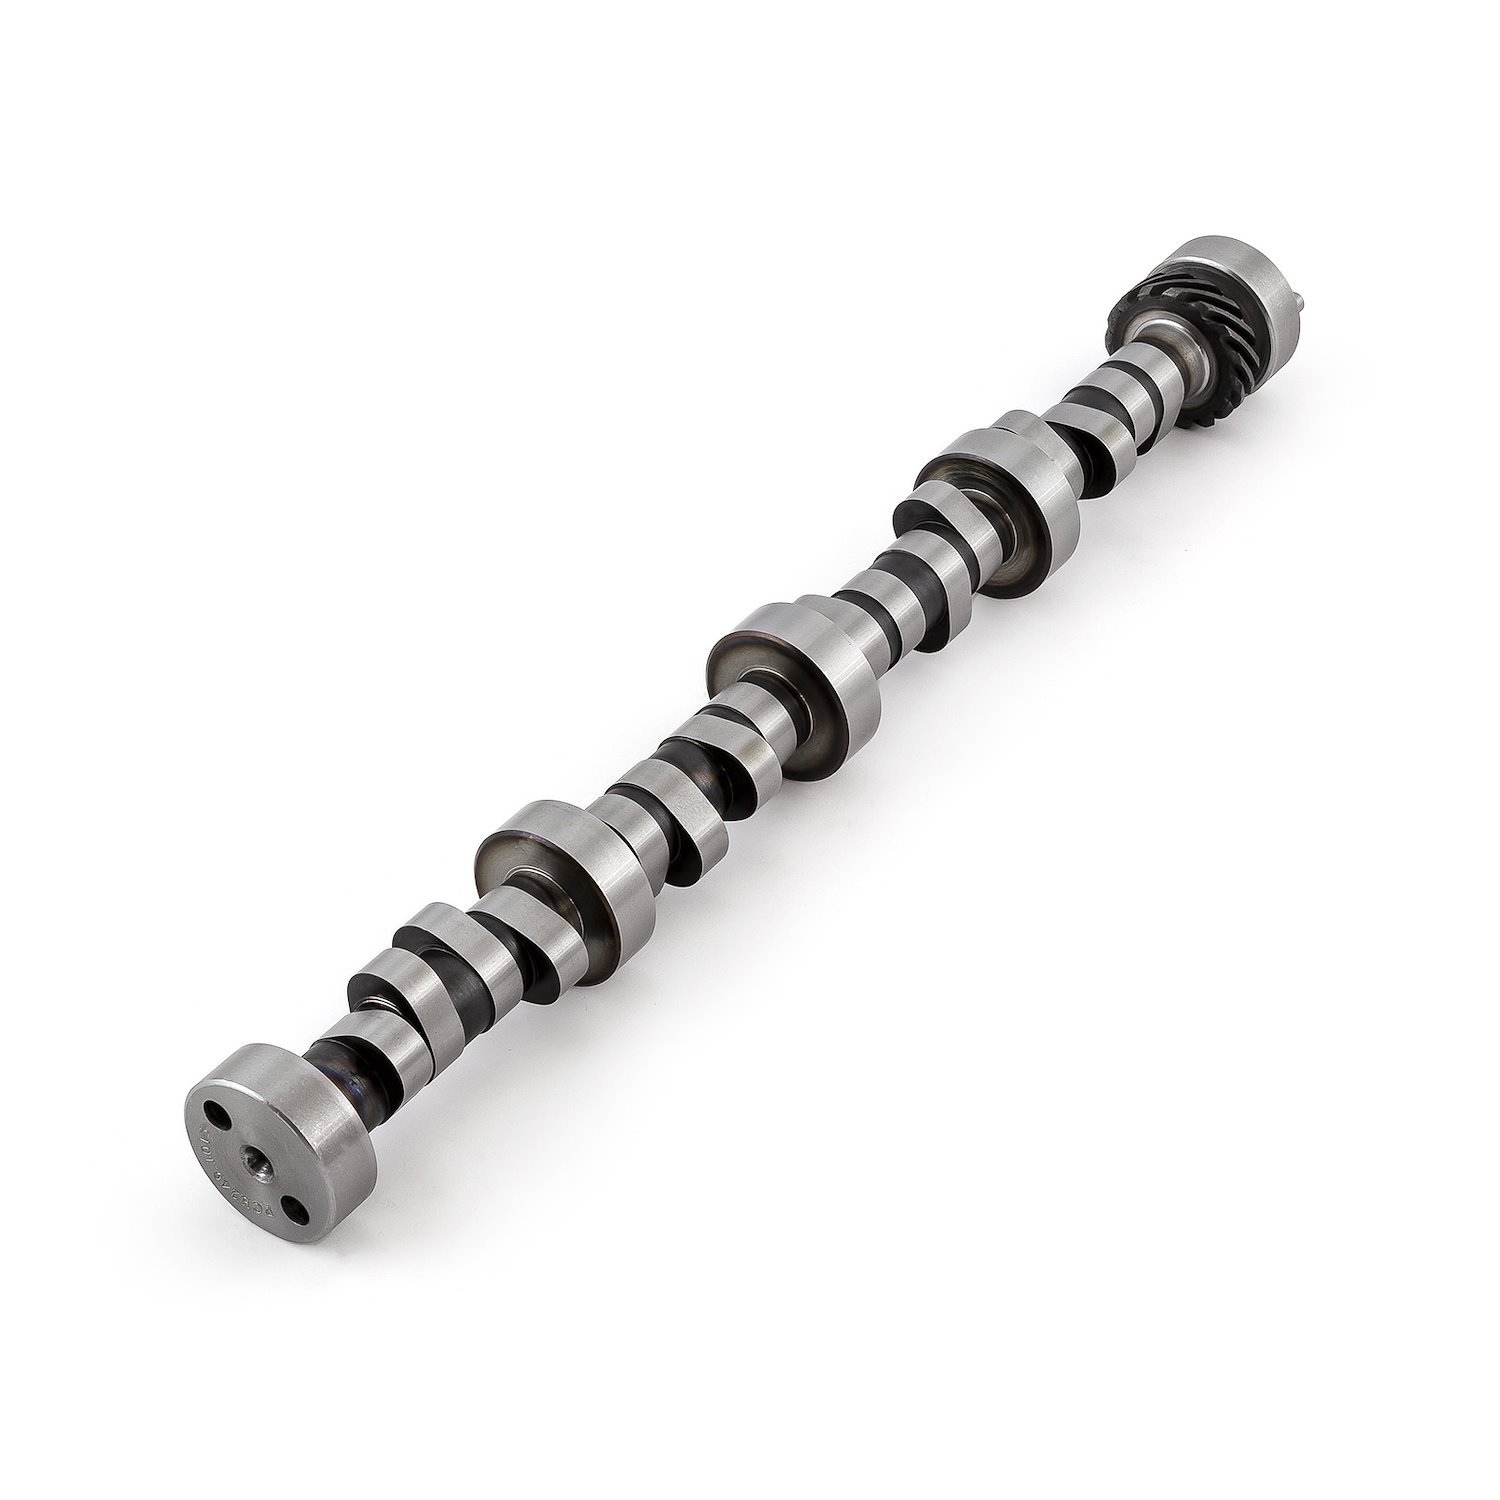 Ford 302 351 Cleveland Hydraulic Roller Camshaft 299 Int. 319 Exh. Duration